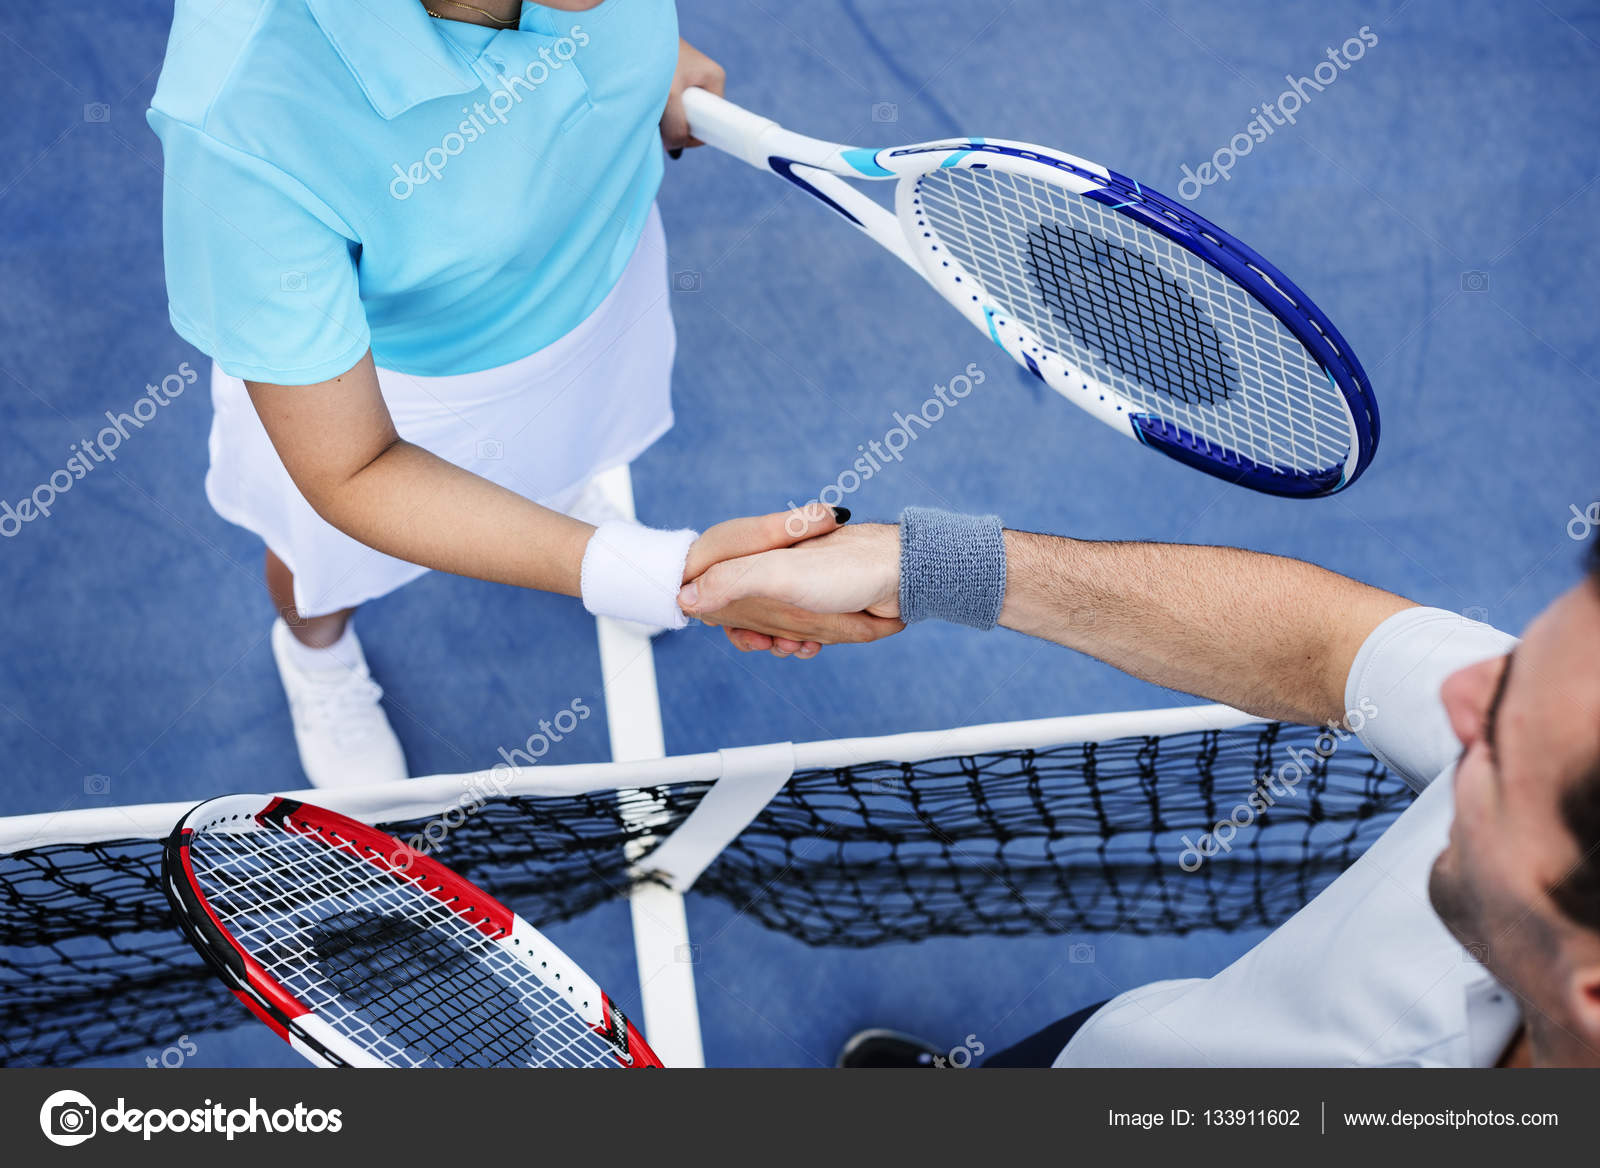 People Play In Tennis Court — Stock Photo © Rawpixel 133911602